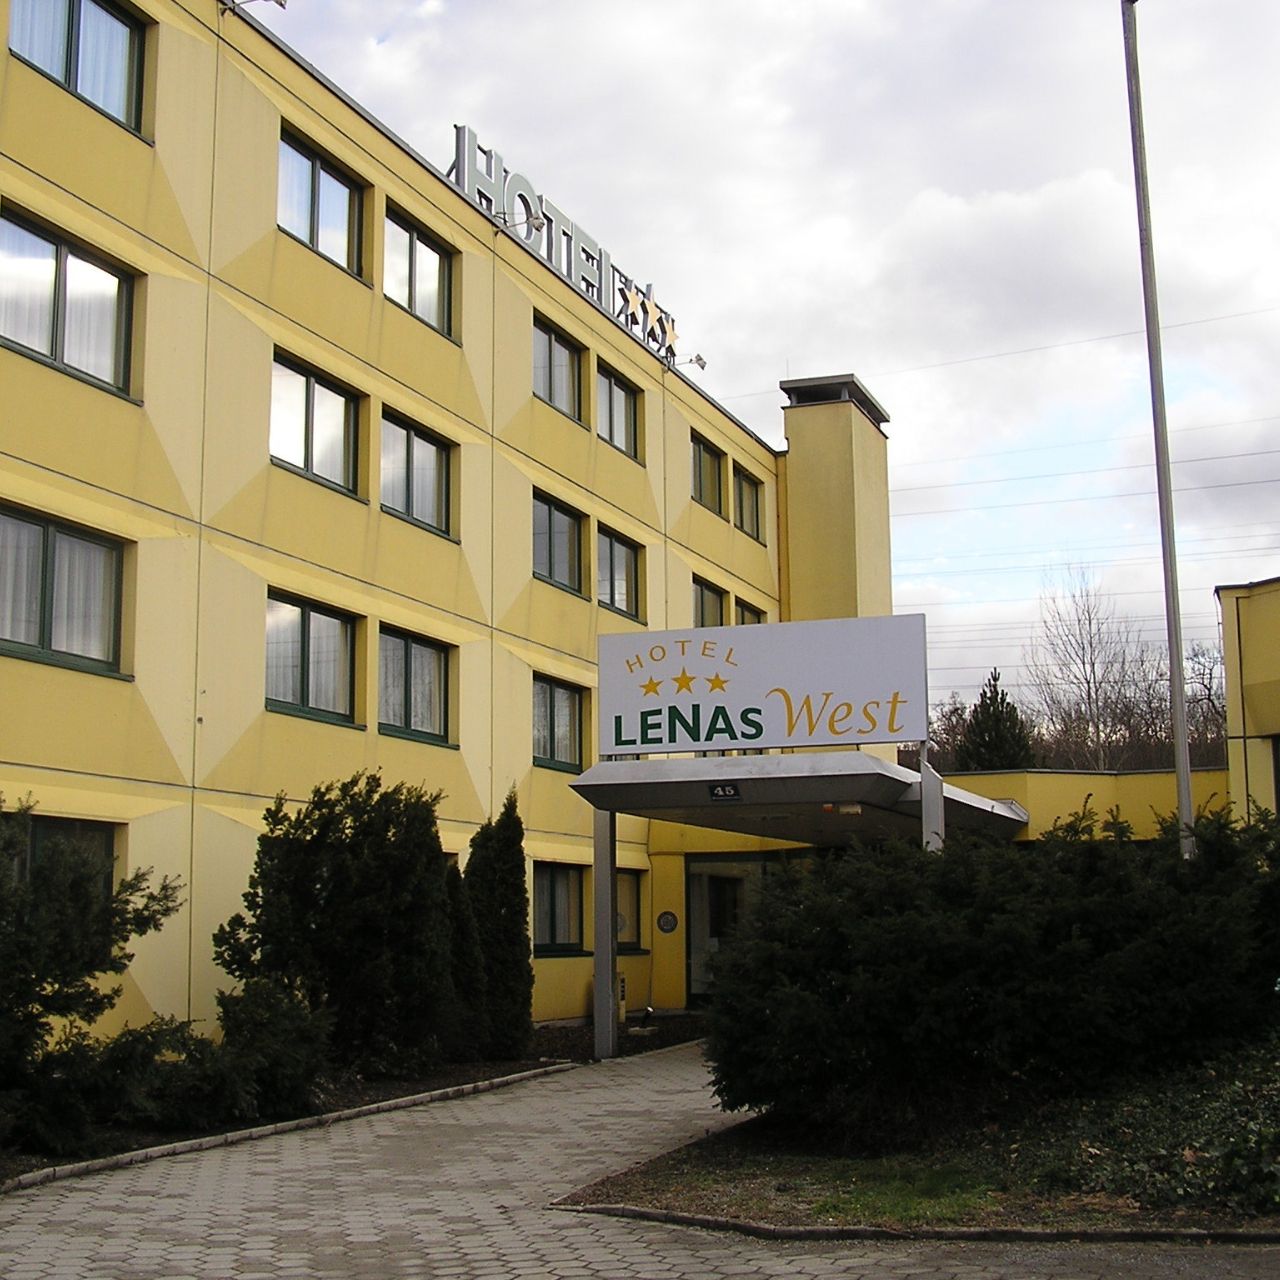 Hotel Lenas West - Vienna - Great prices at HOTEL INFO